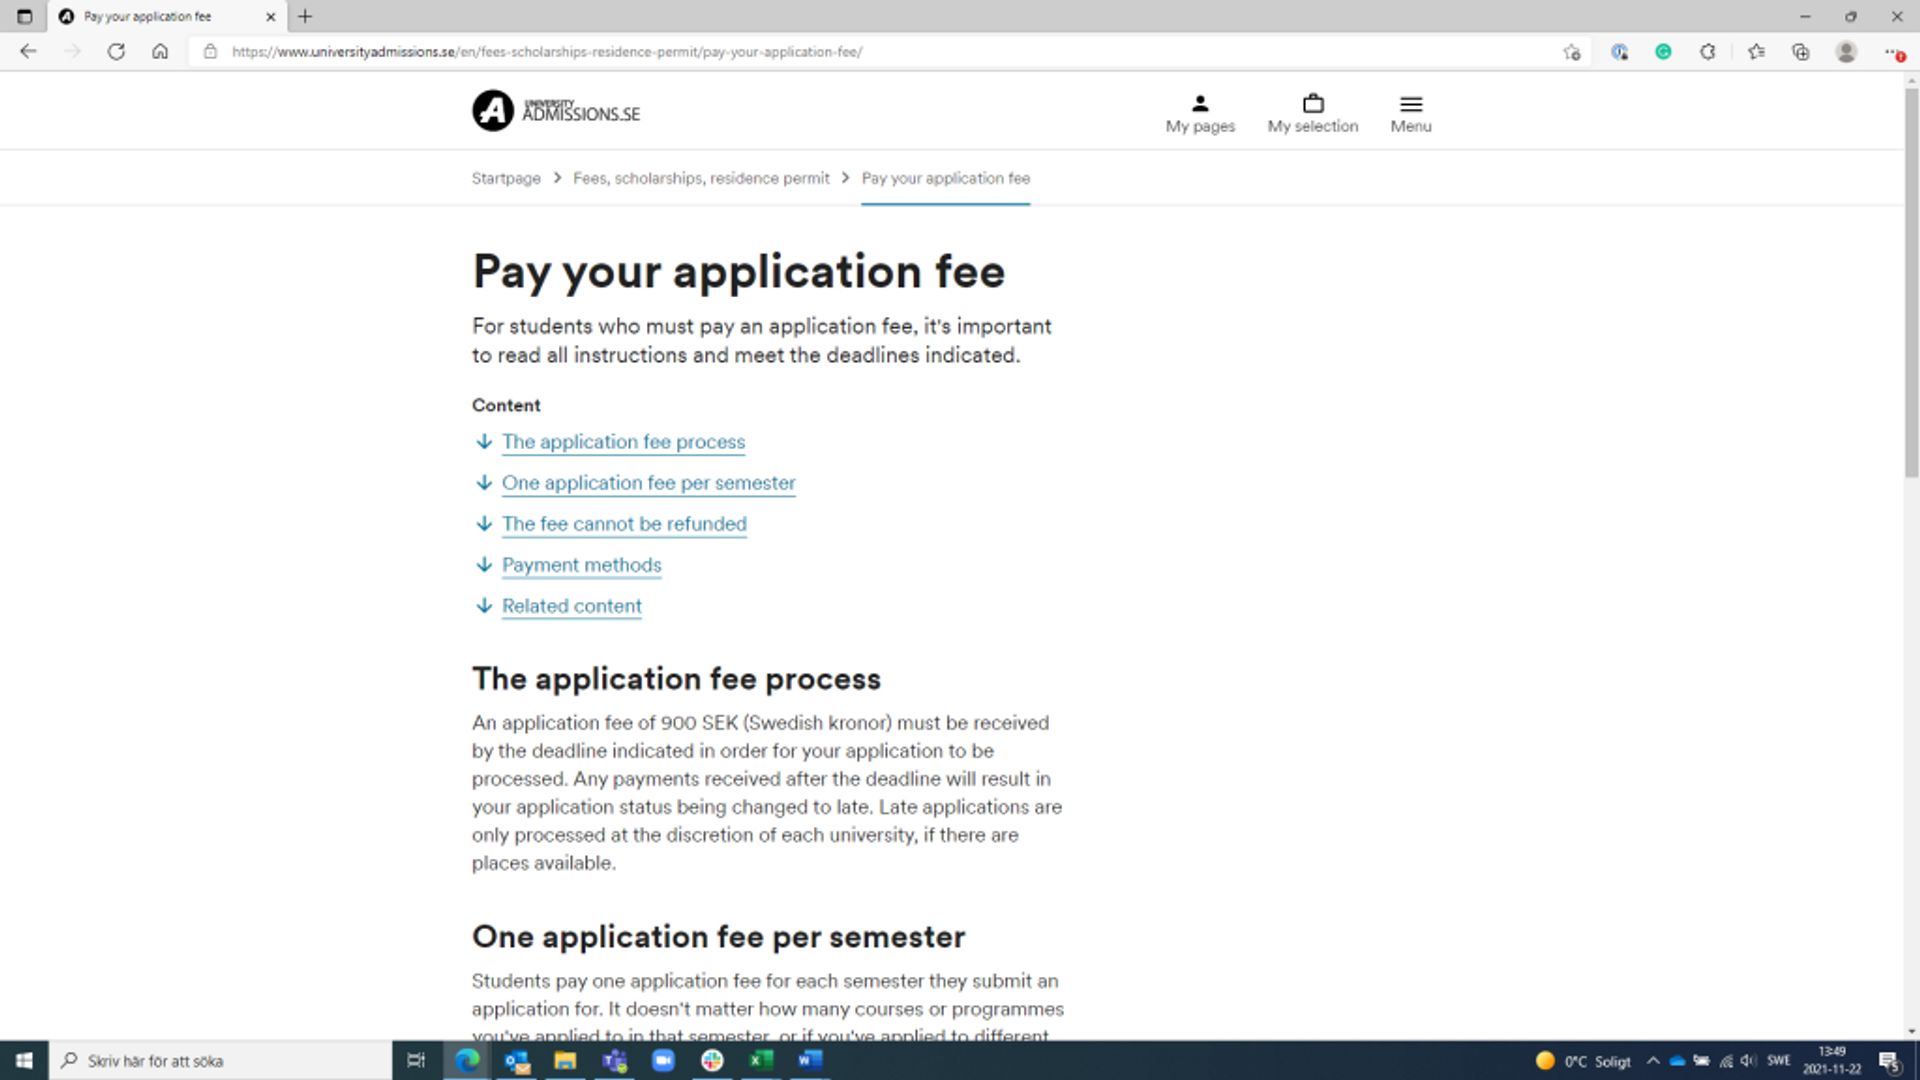 Screenshot of webpage where the application fee can be paid.